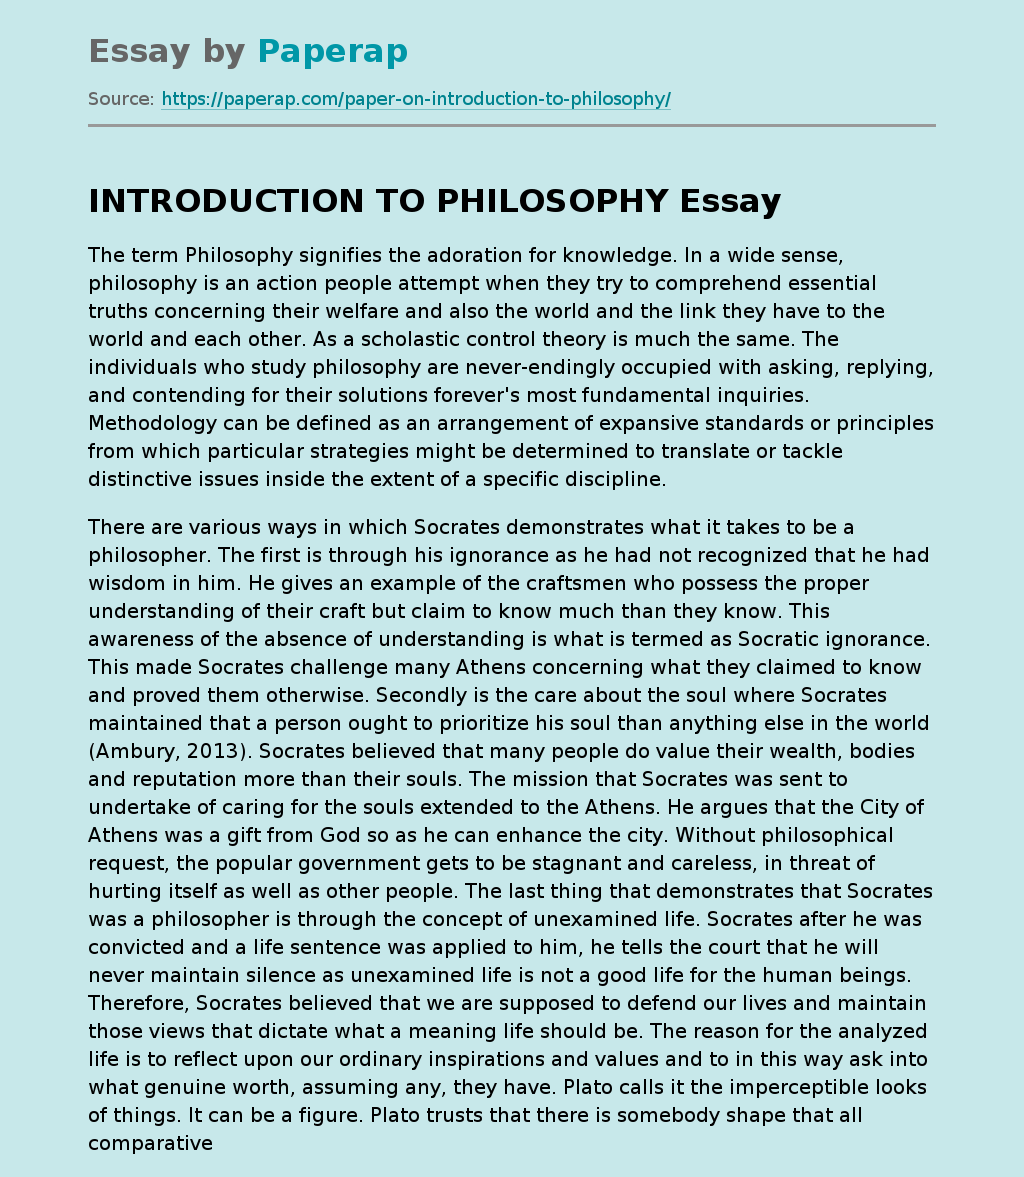 INTRODUCTION TO PHILOSOPHY